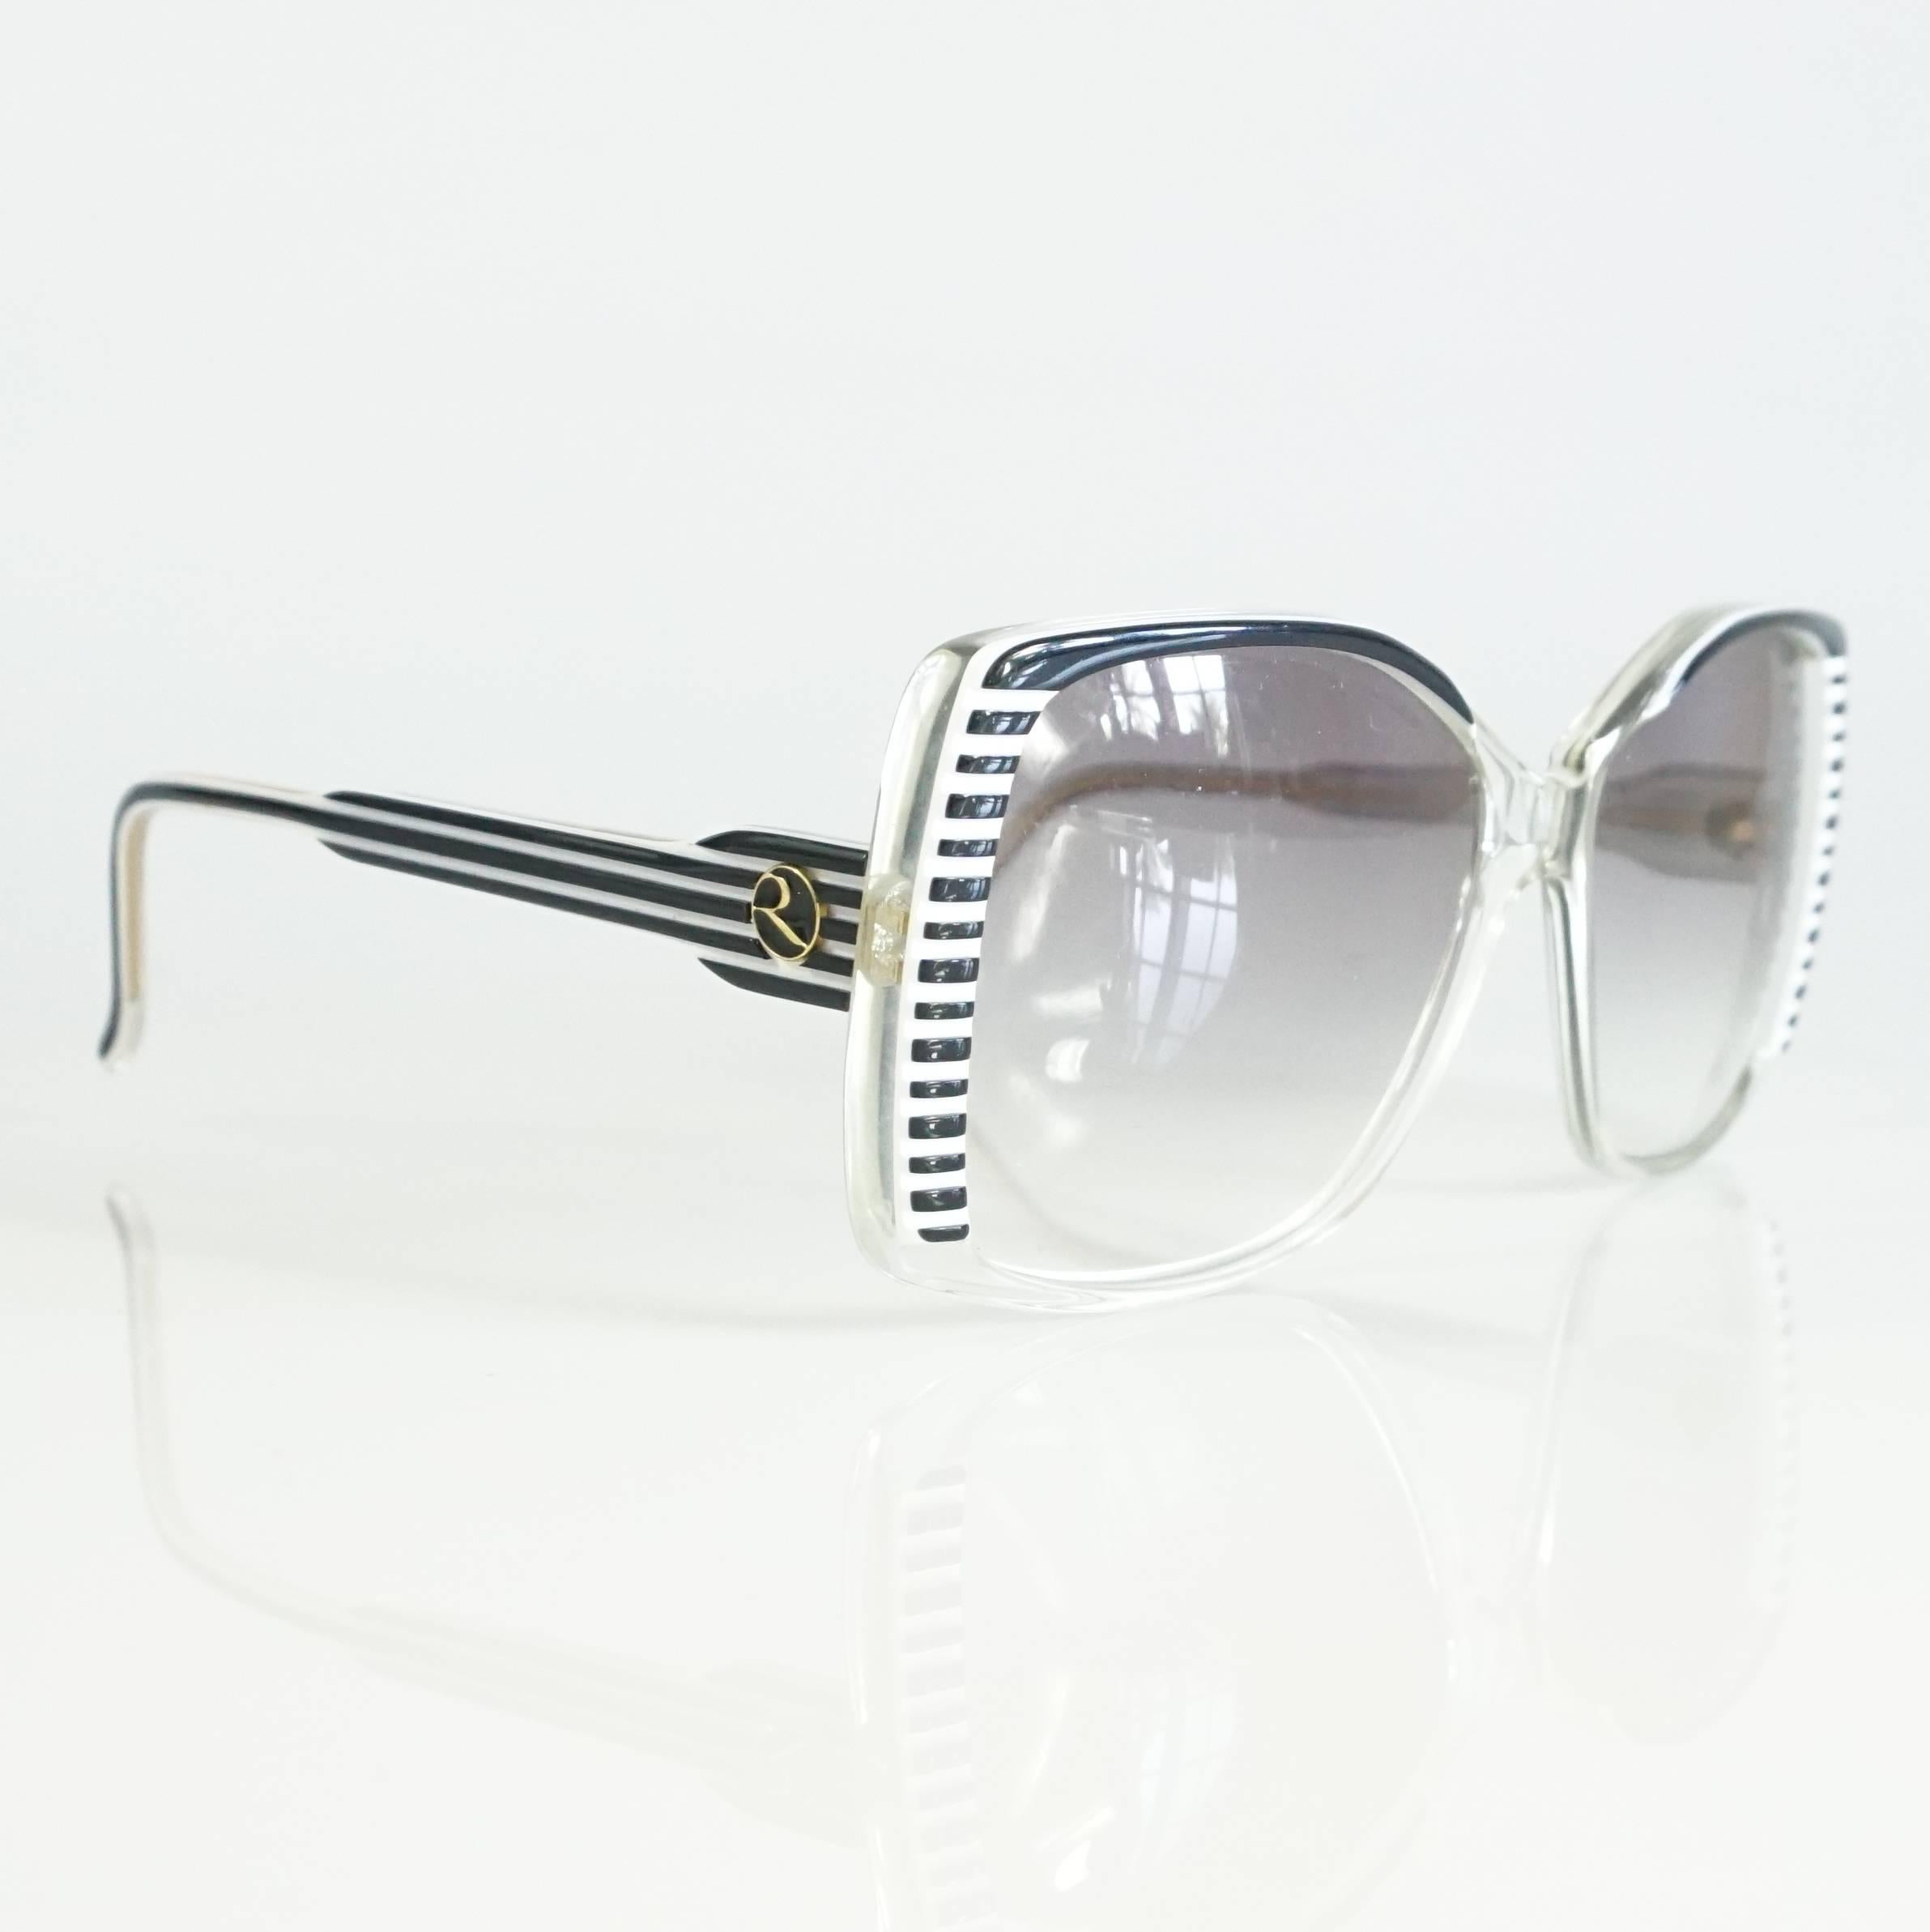 These fun and vintage handmade Rochas sunglasses have large square frames. They are made of black and white Lucite. They are in excellent condition. Circa 1970's.

Measurements
Leg Length: 4.75"
Front (lens to lens): 5.75"
Lens